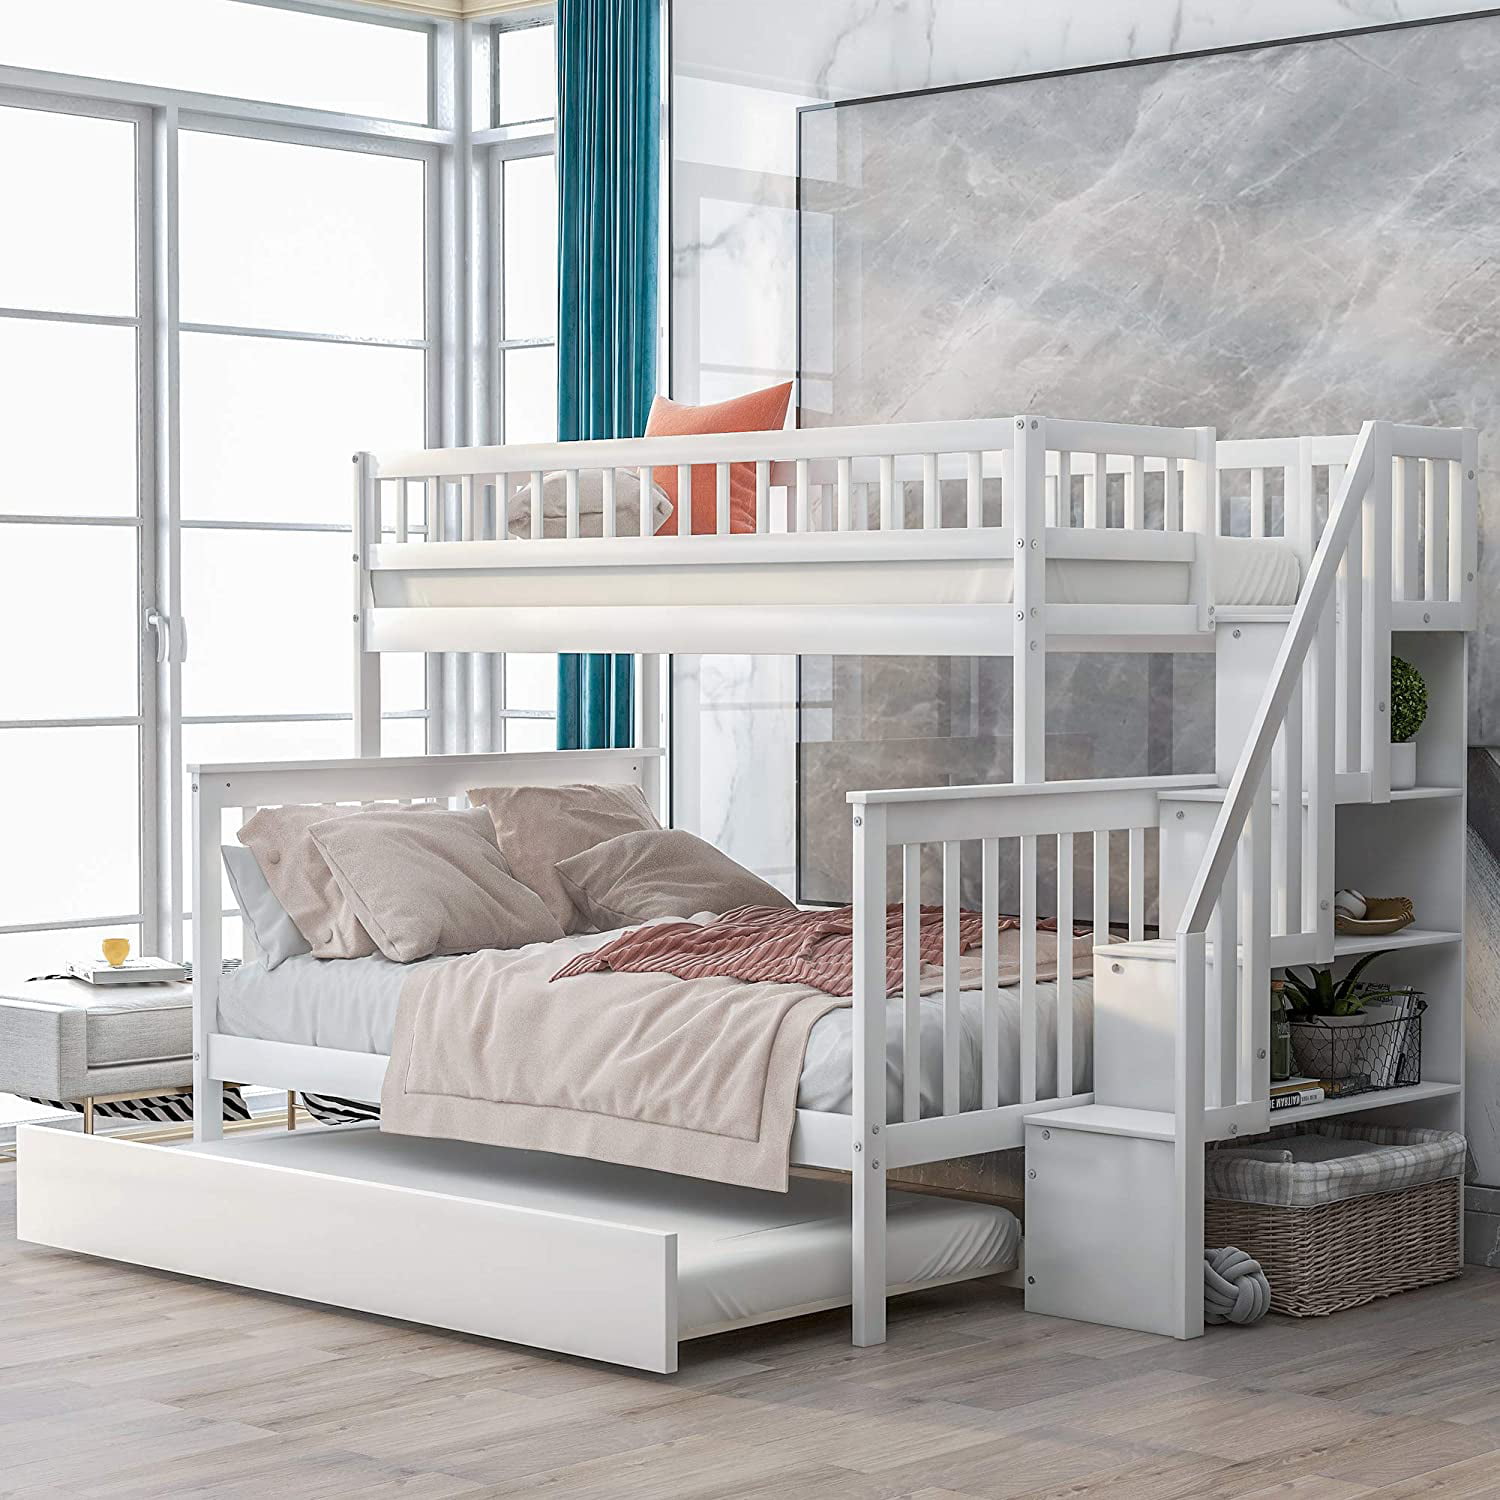 Piscis Bunk Bed Beds Twin Over, Bunk Beds For Girls With Stairs